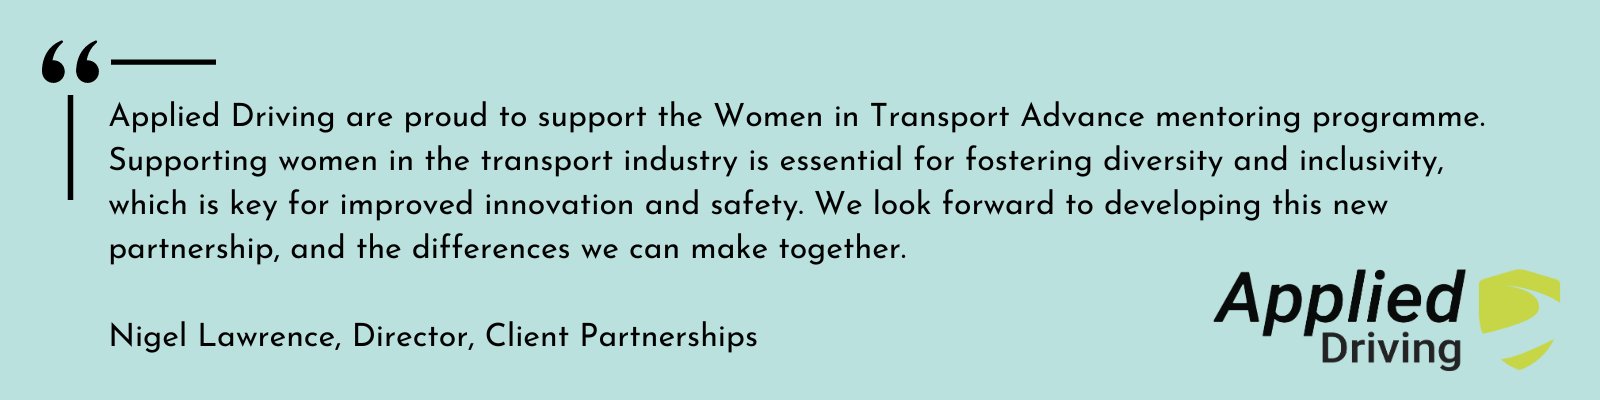  Applied Driving are proud to support the Women in Transport Advance mentoring programme. Supporting women in the transport industry is essential for fostering diversity and inclusivity, which is key for improved innovation and safety. We look forwar